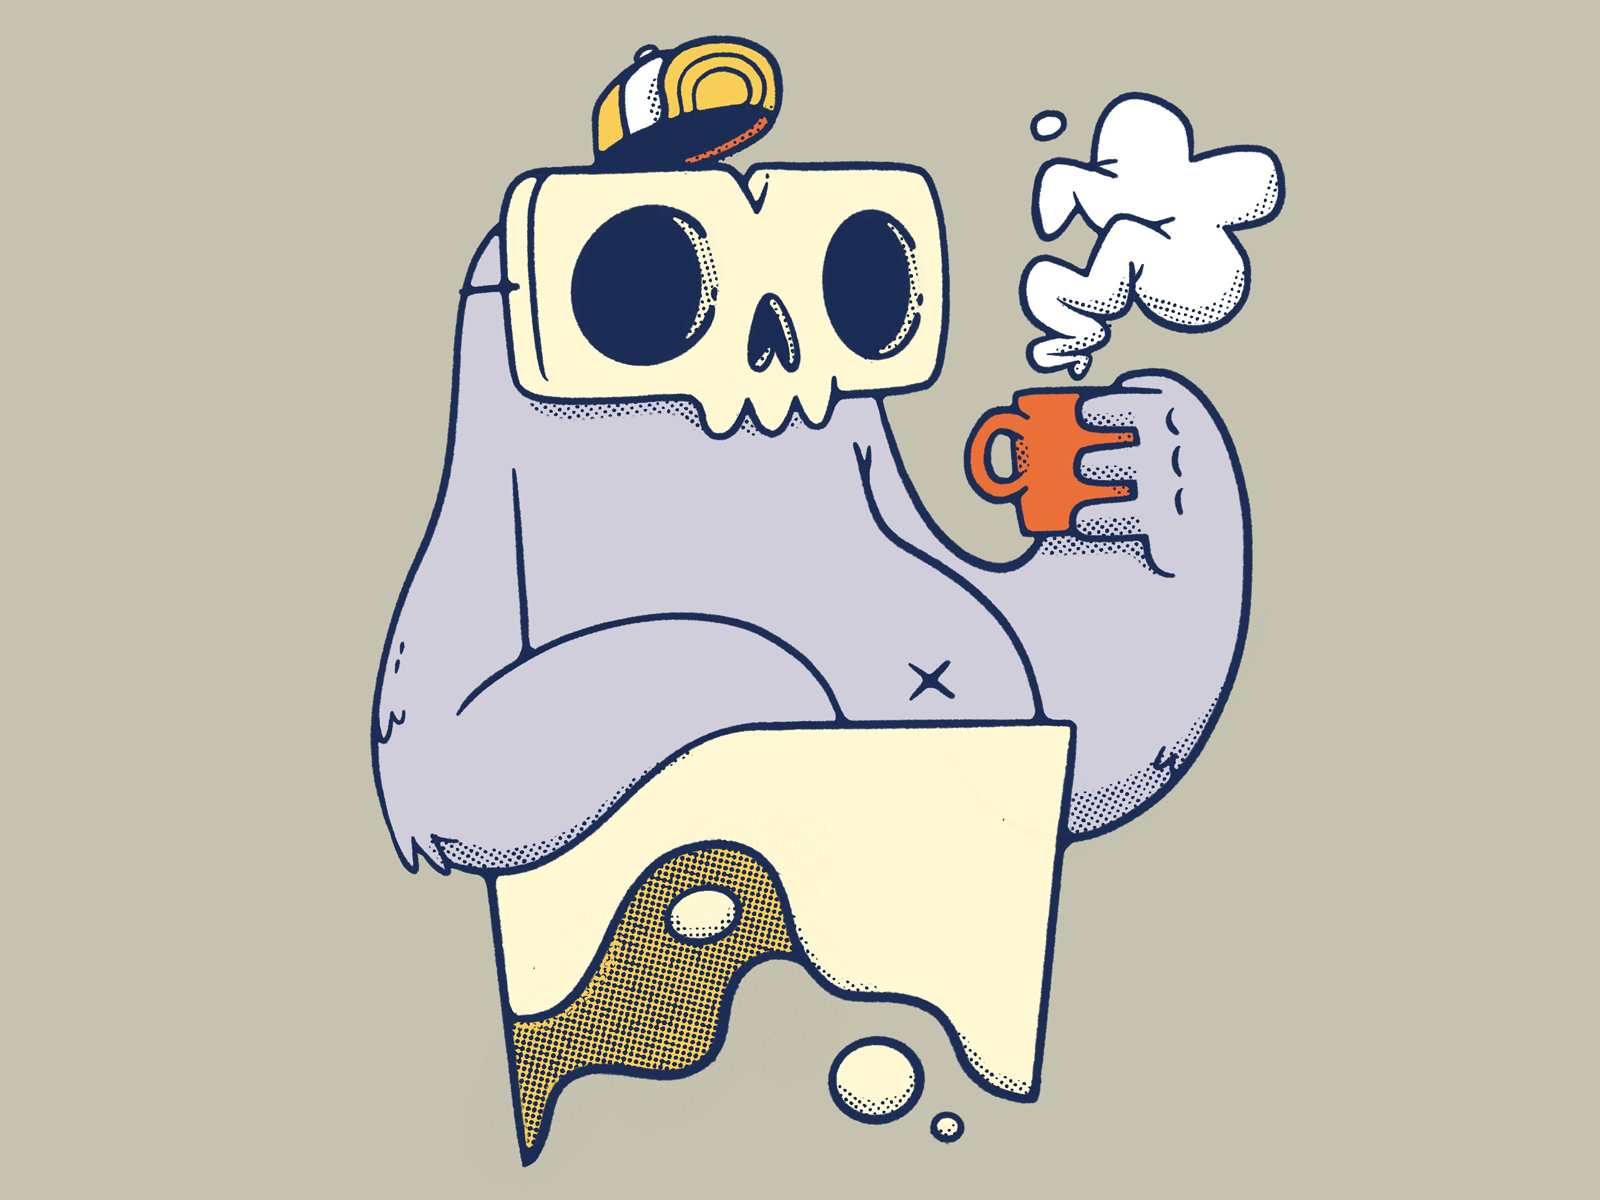 Skull Monster and a Cup of Joe by Jetpacks and Rollerskates on Dribbble